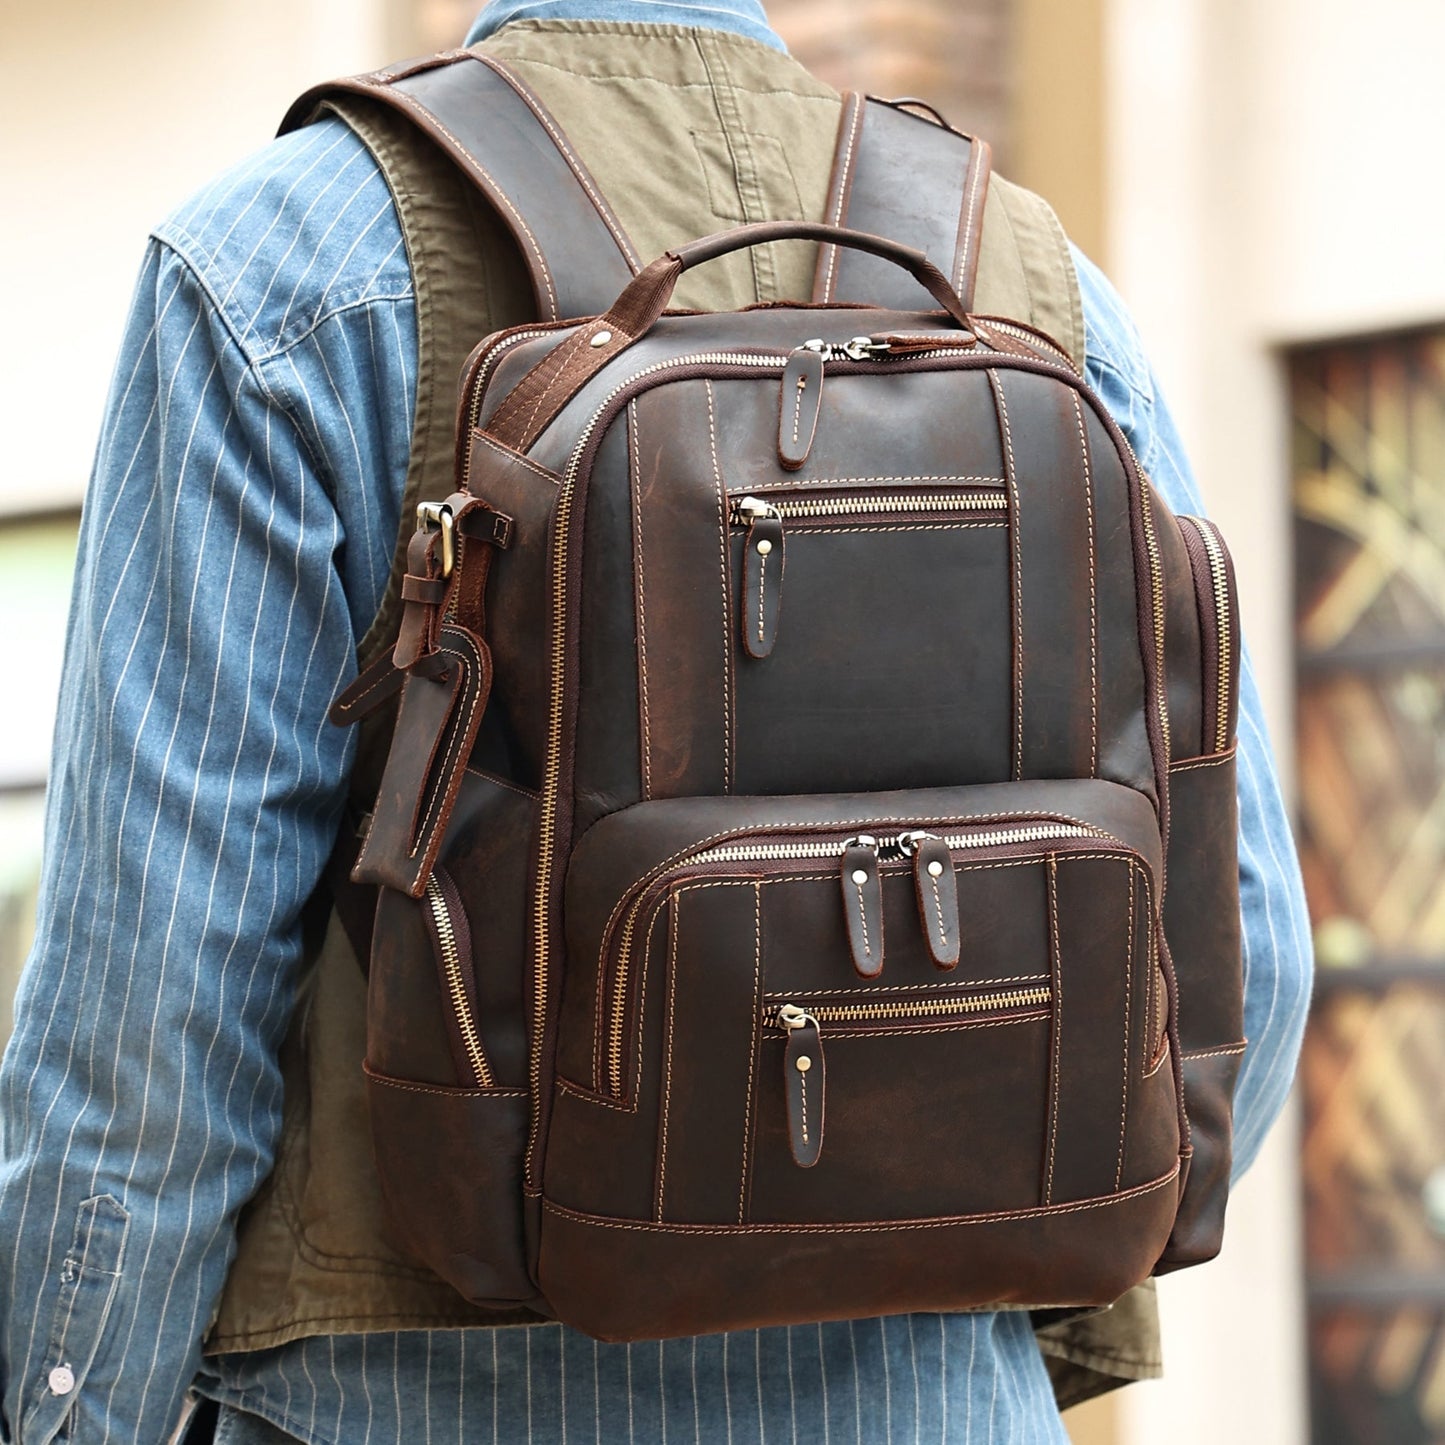 Elegant Leather Daypack featuring Spacious Interior and Organizational Compartments woyaza